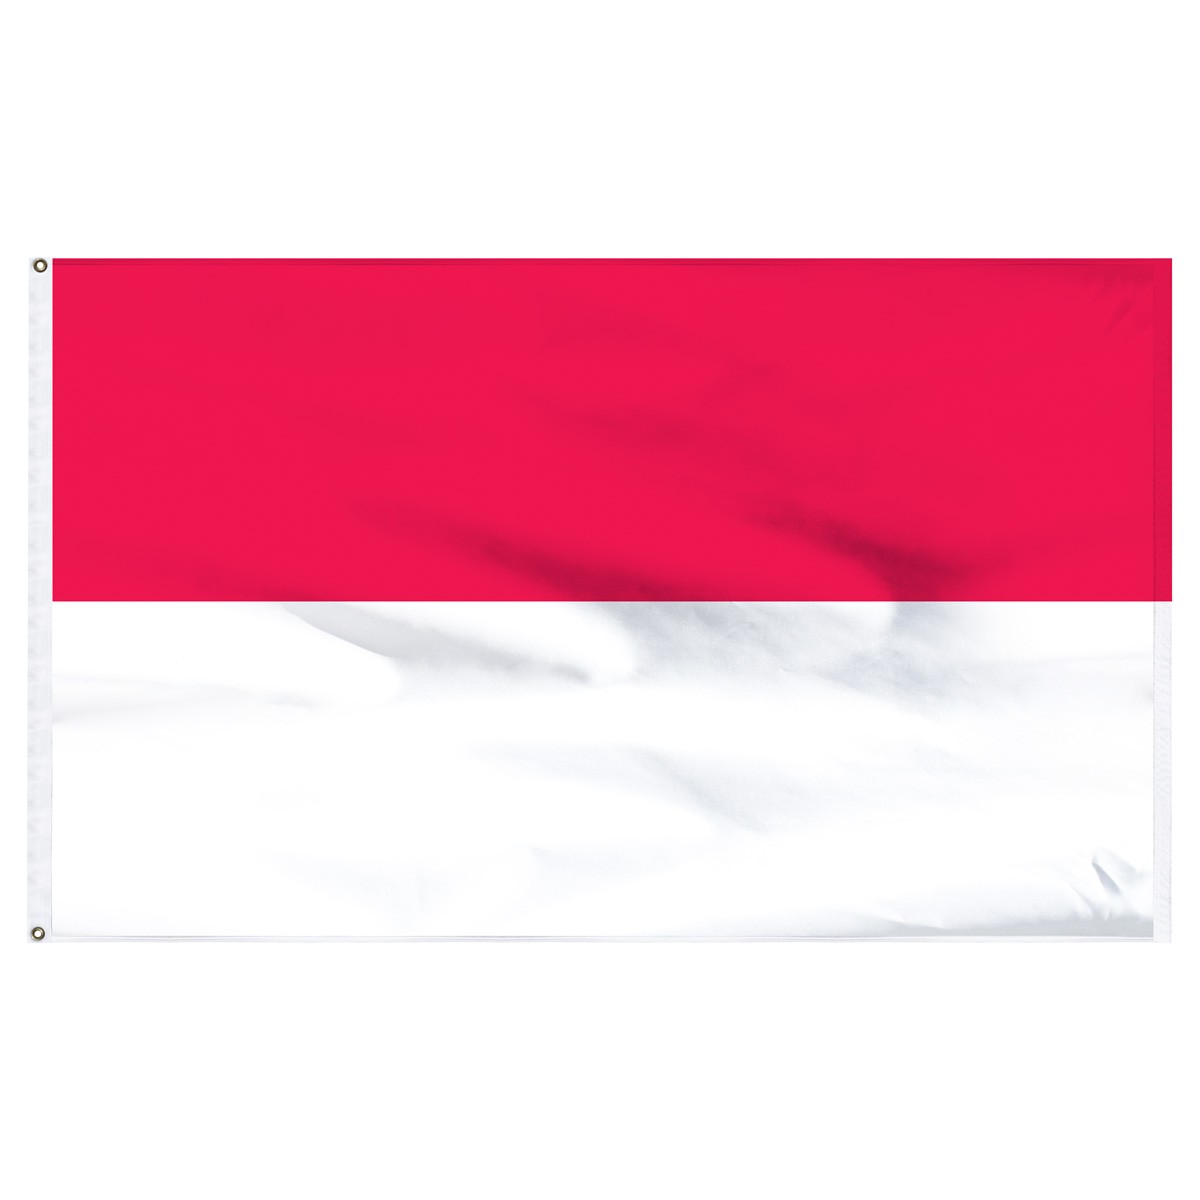 Indonesia Flags and Pennants